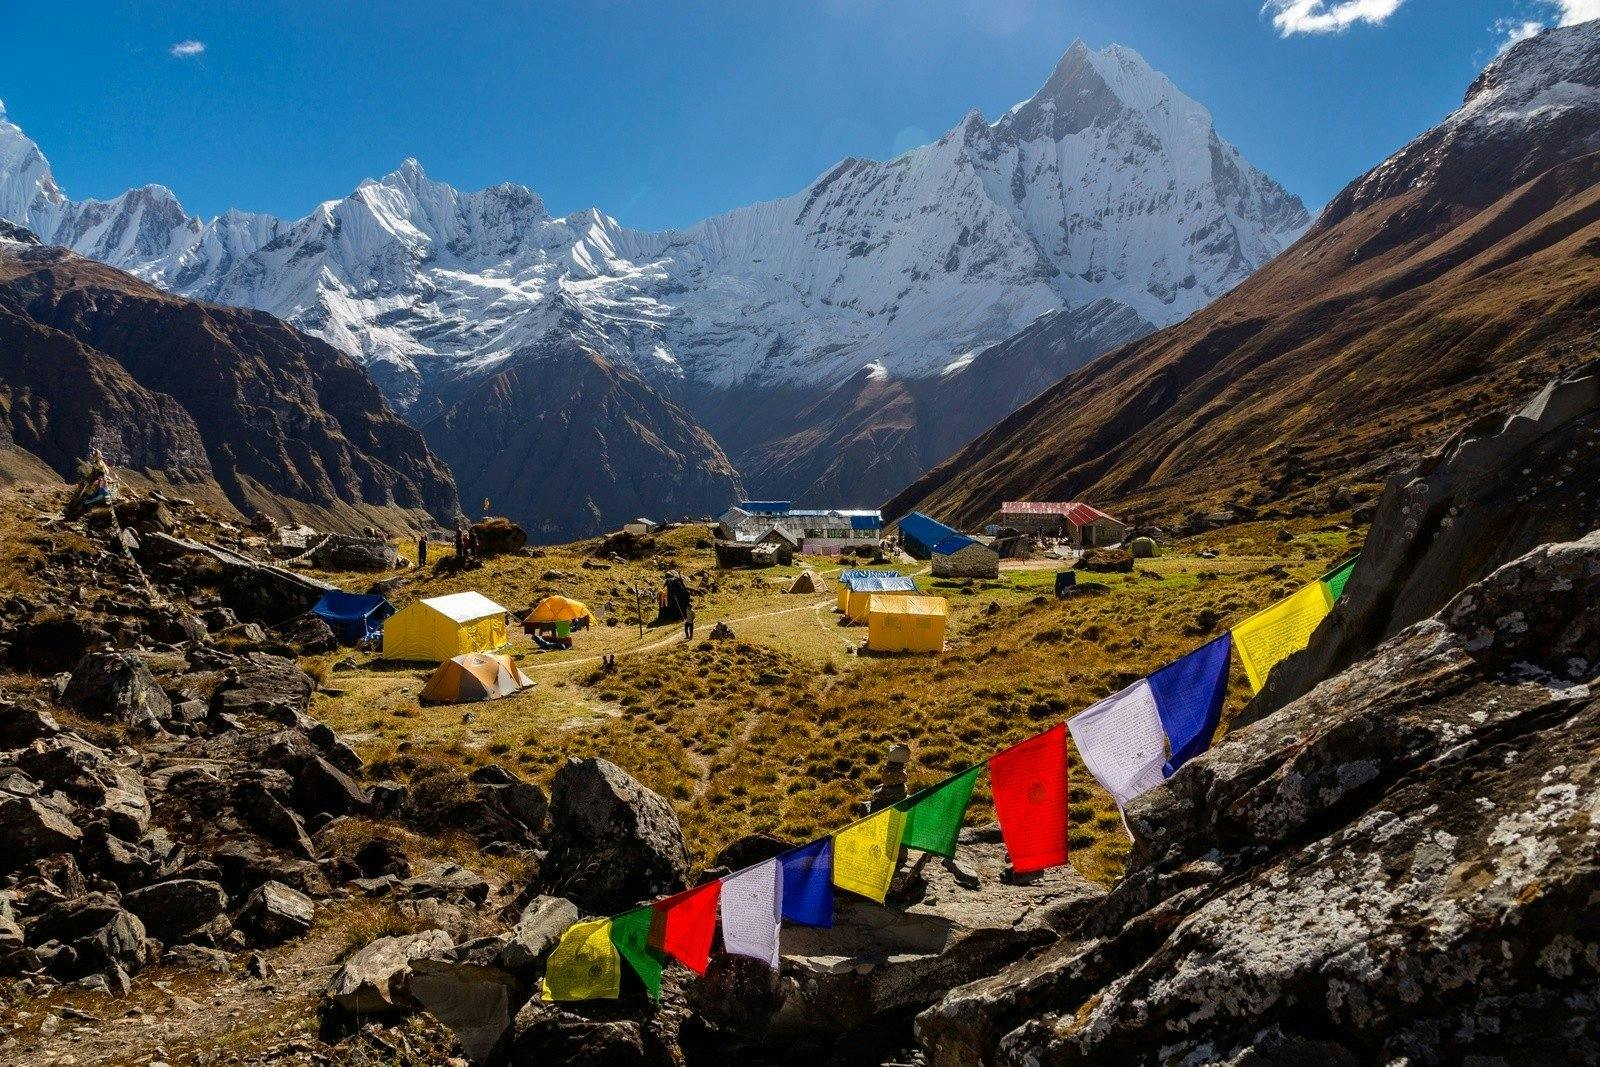 A Complete Guide for Trekking in Nepal